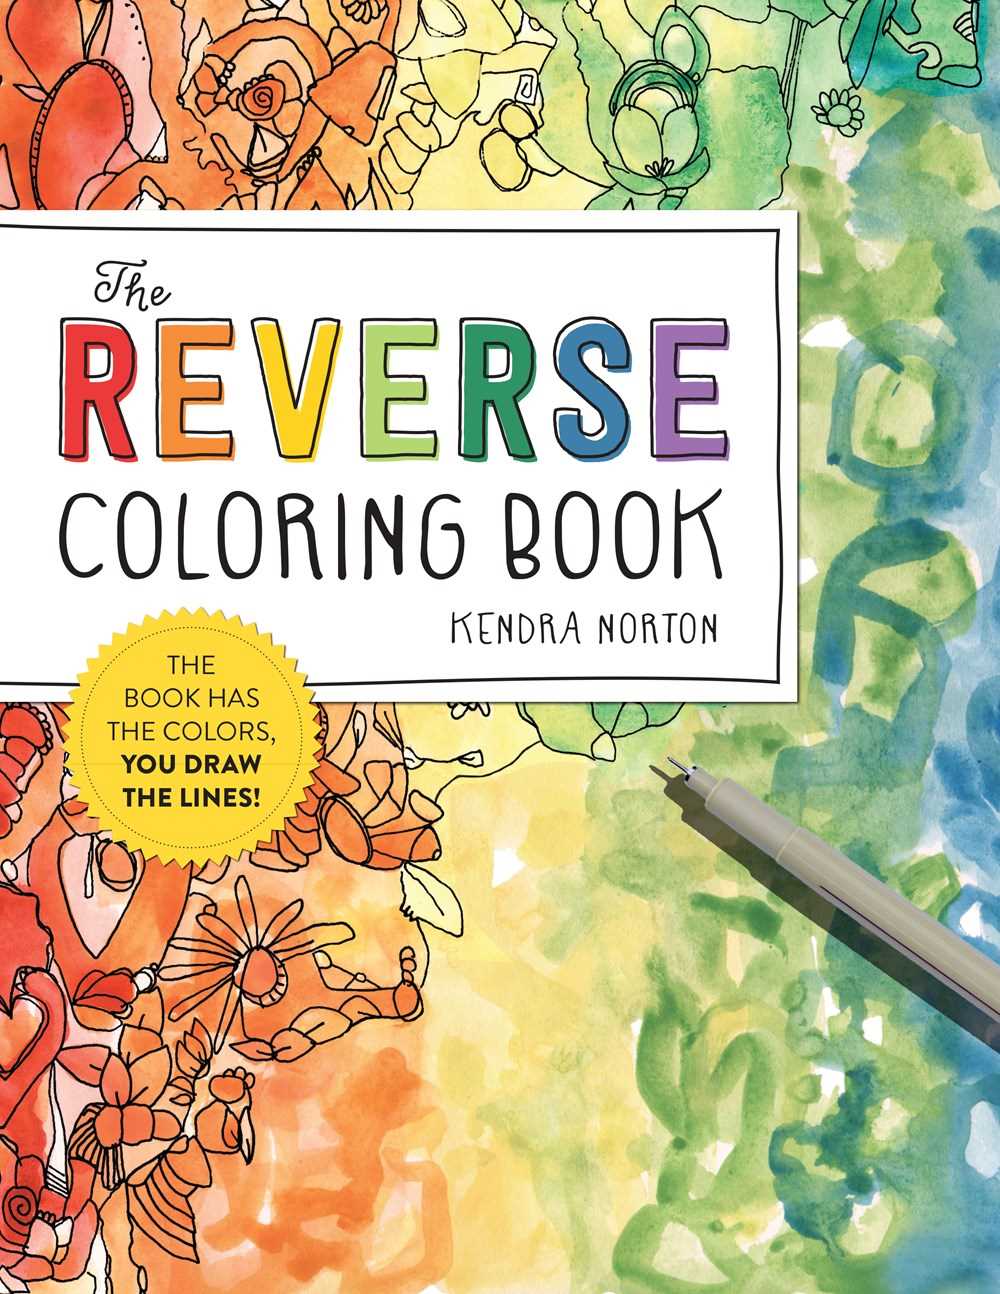 The Reverse Coloring Book®